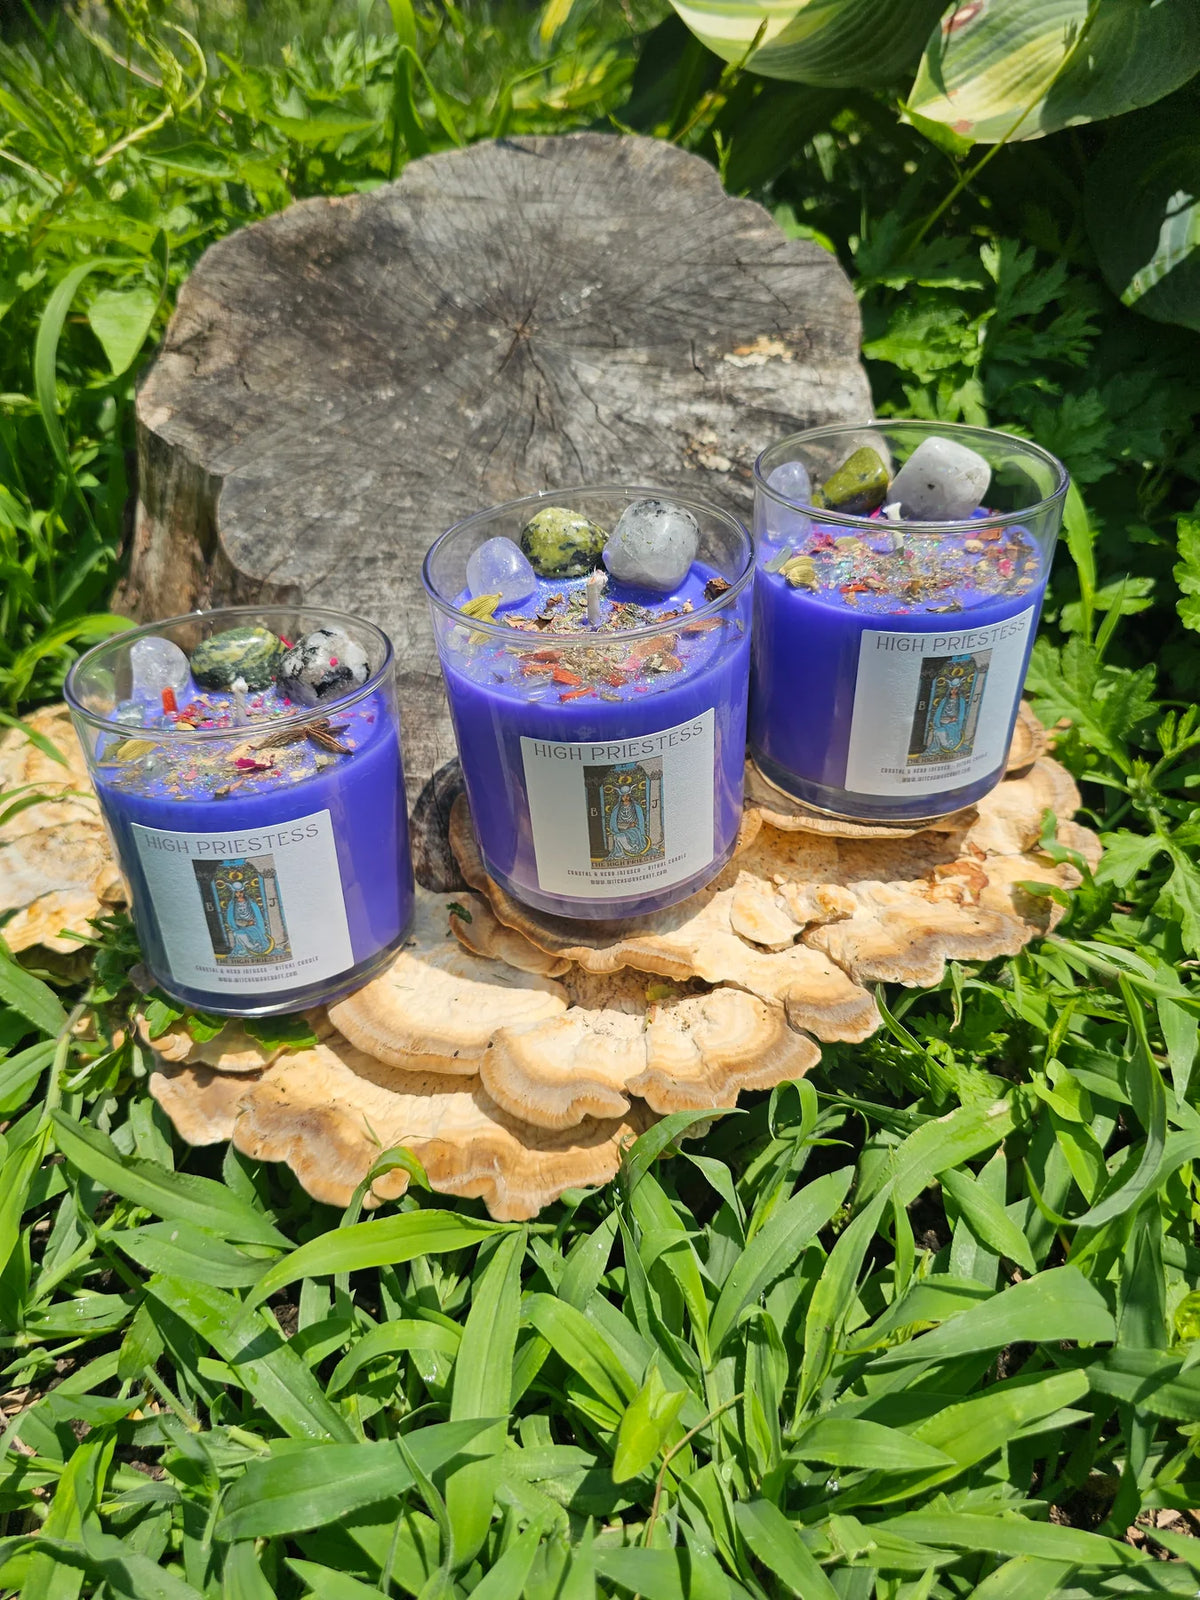 Witch's Way Craft High Priestess Spell Candle